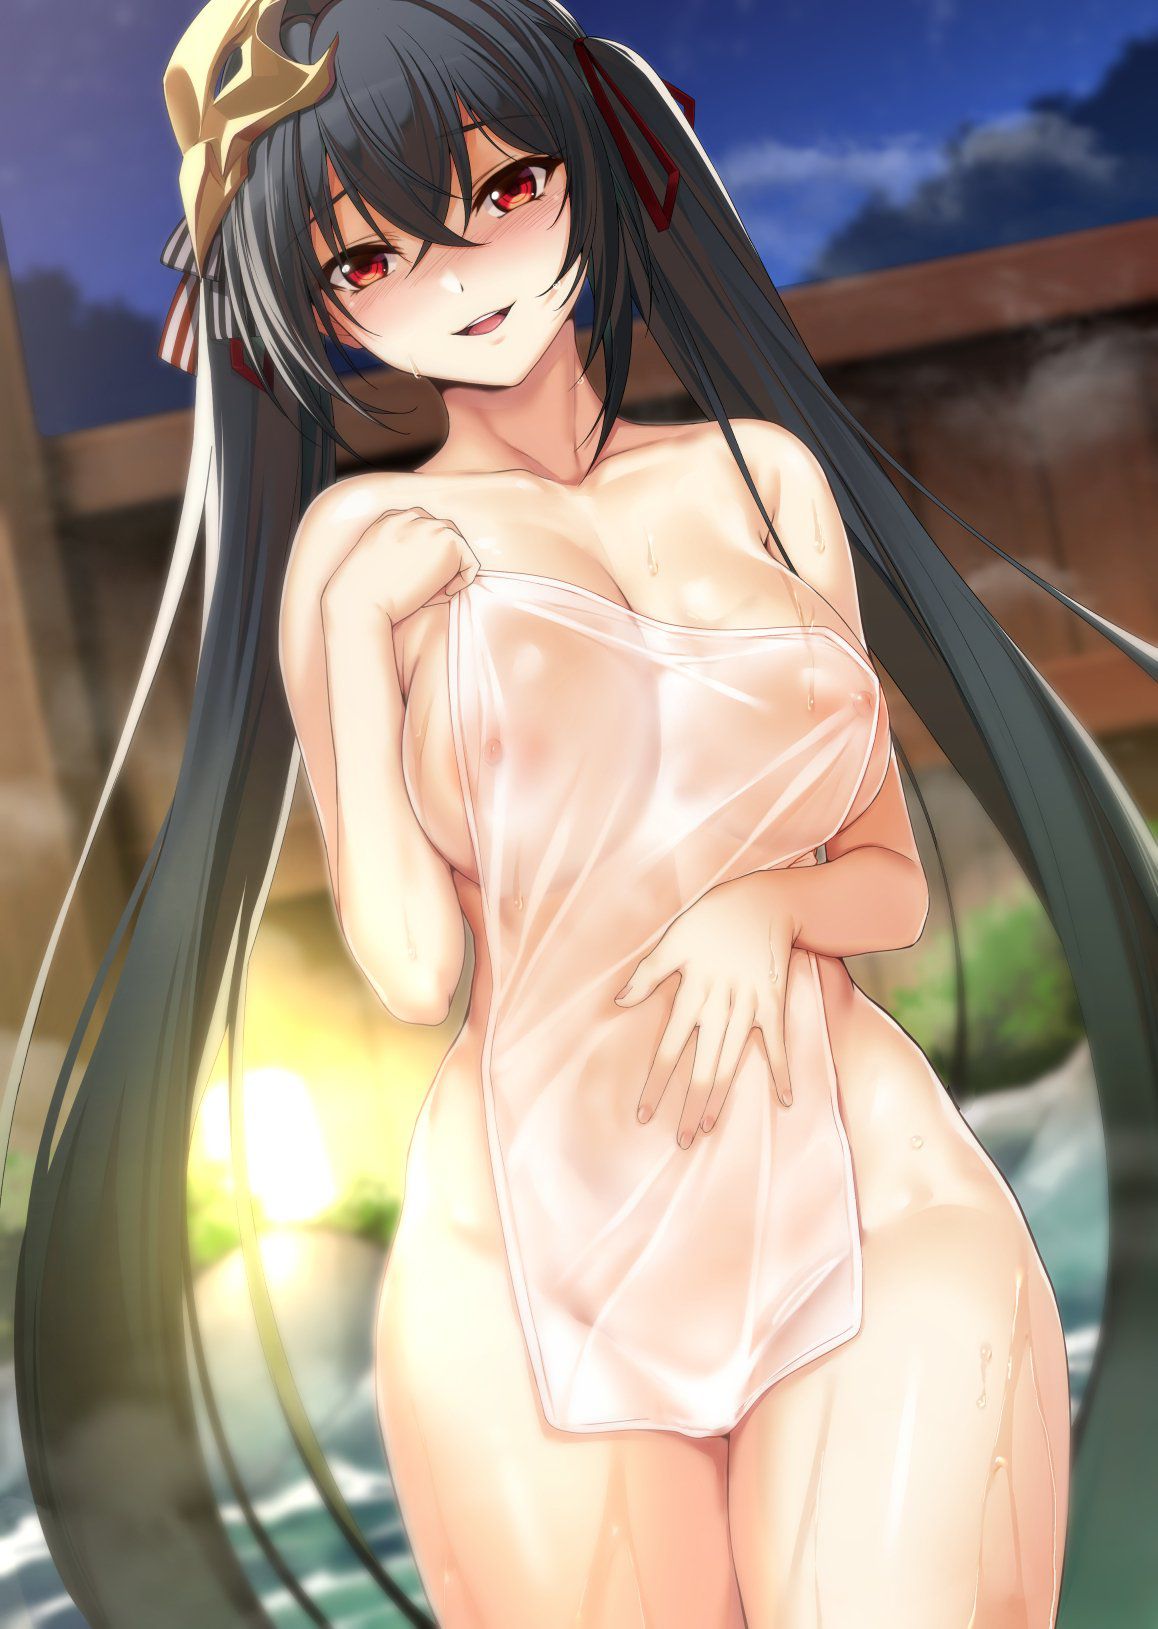 [Erotic anime summary] collection of images of beautiful girls and beautiful girls who are exposing nasty bodies in the bath [50 sheets] 25